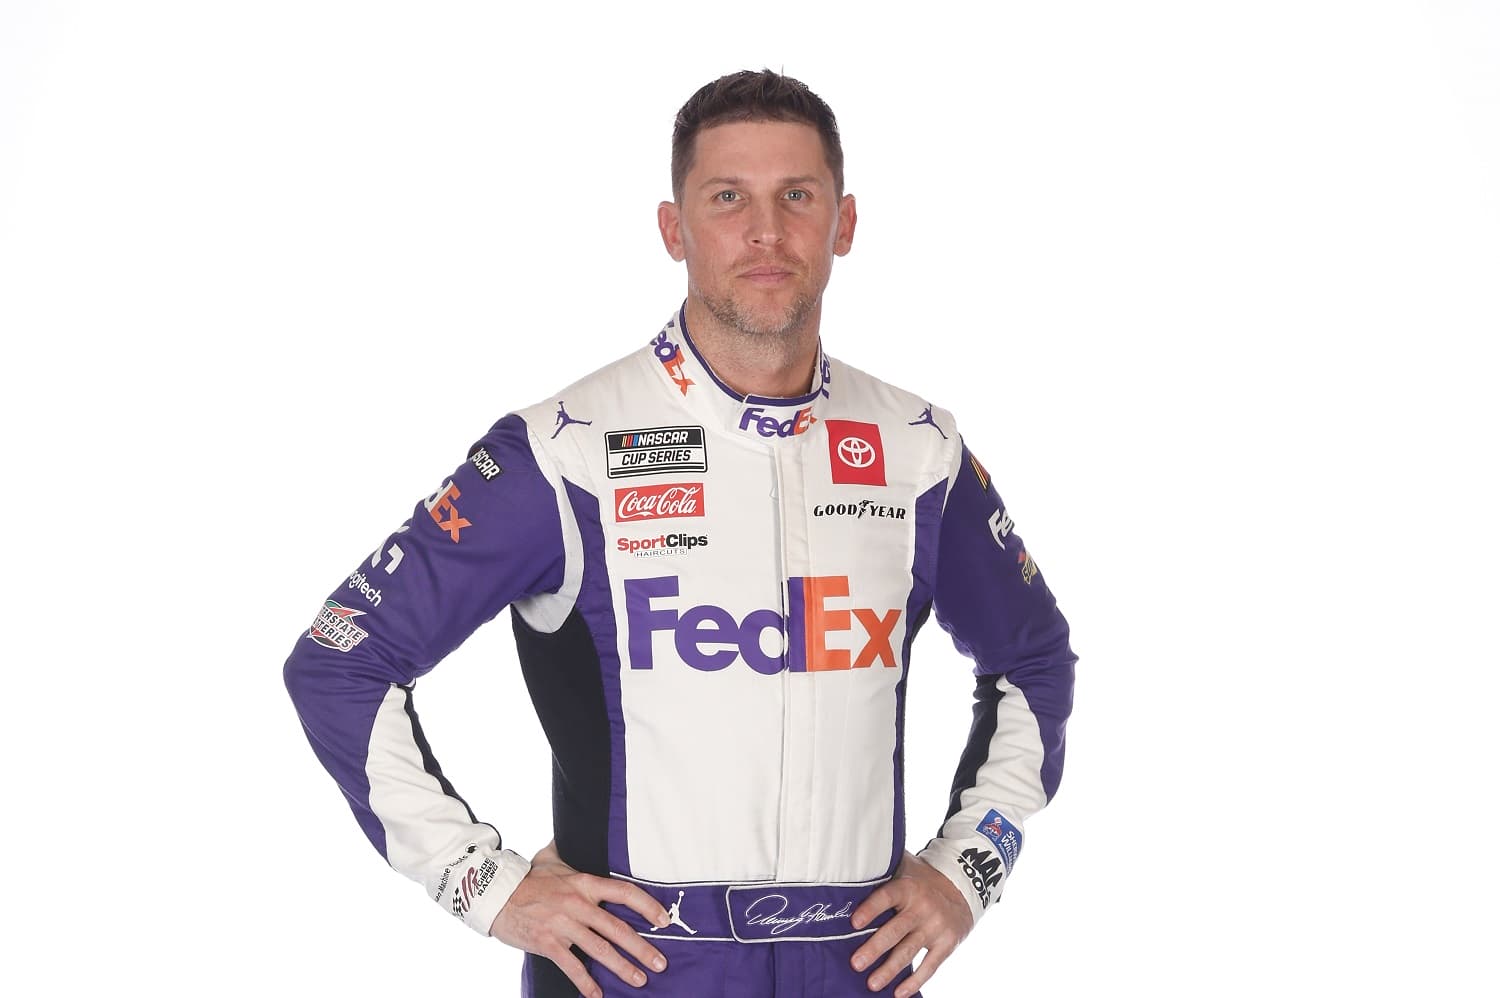 Driver Denny Hamlin poses for a photo during NASCAR Production Days at Charlotte Convention Center on Jan. 18, 2023 in Charlotte, North Carolina. | Chris Graythen/Getty Images